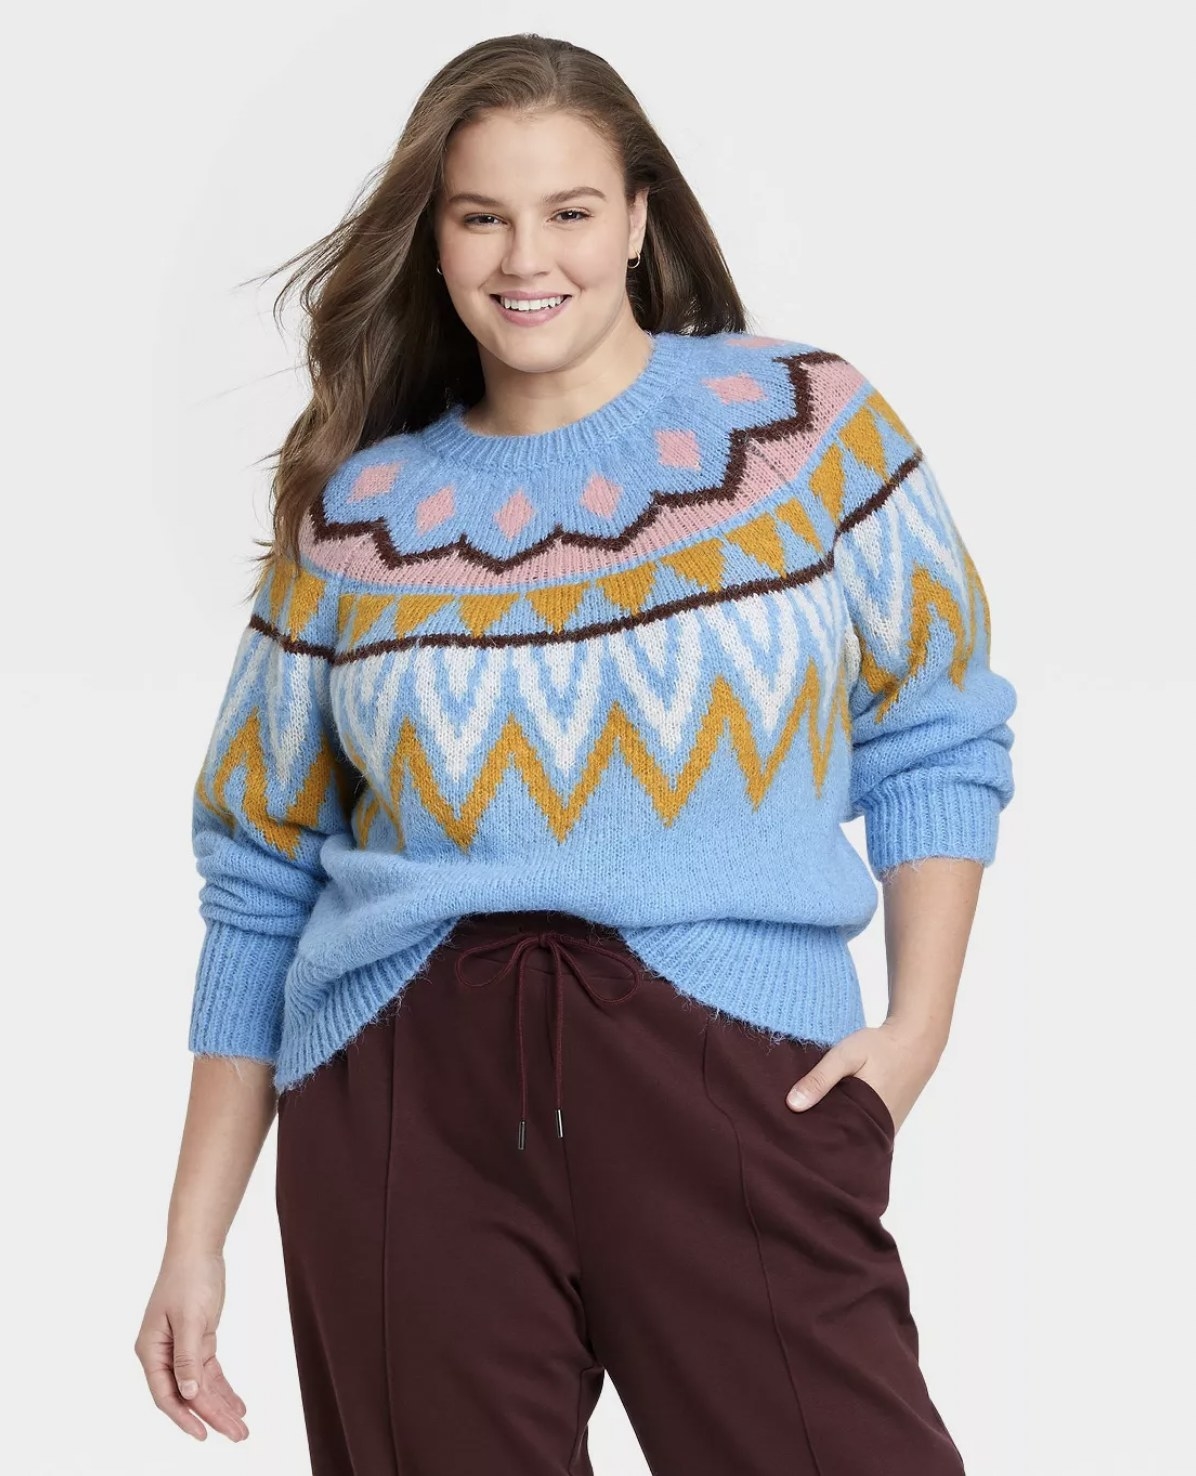 model in the blue, mustard, white, eggplant, and pink-colored sweater